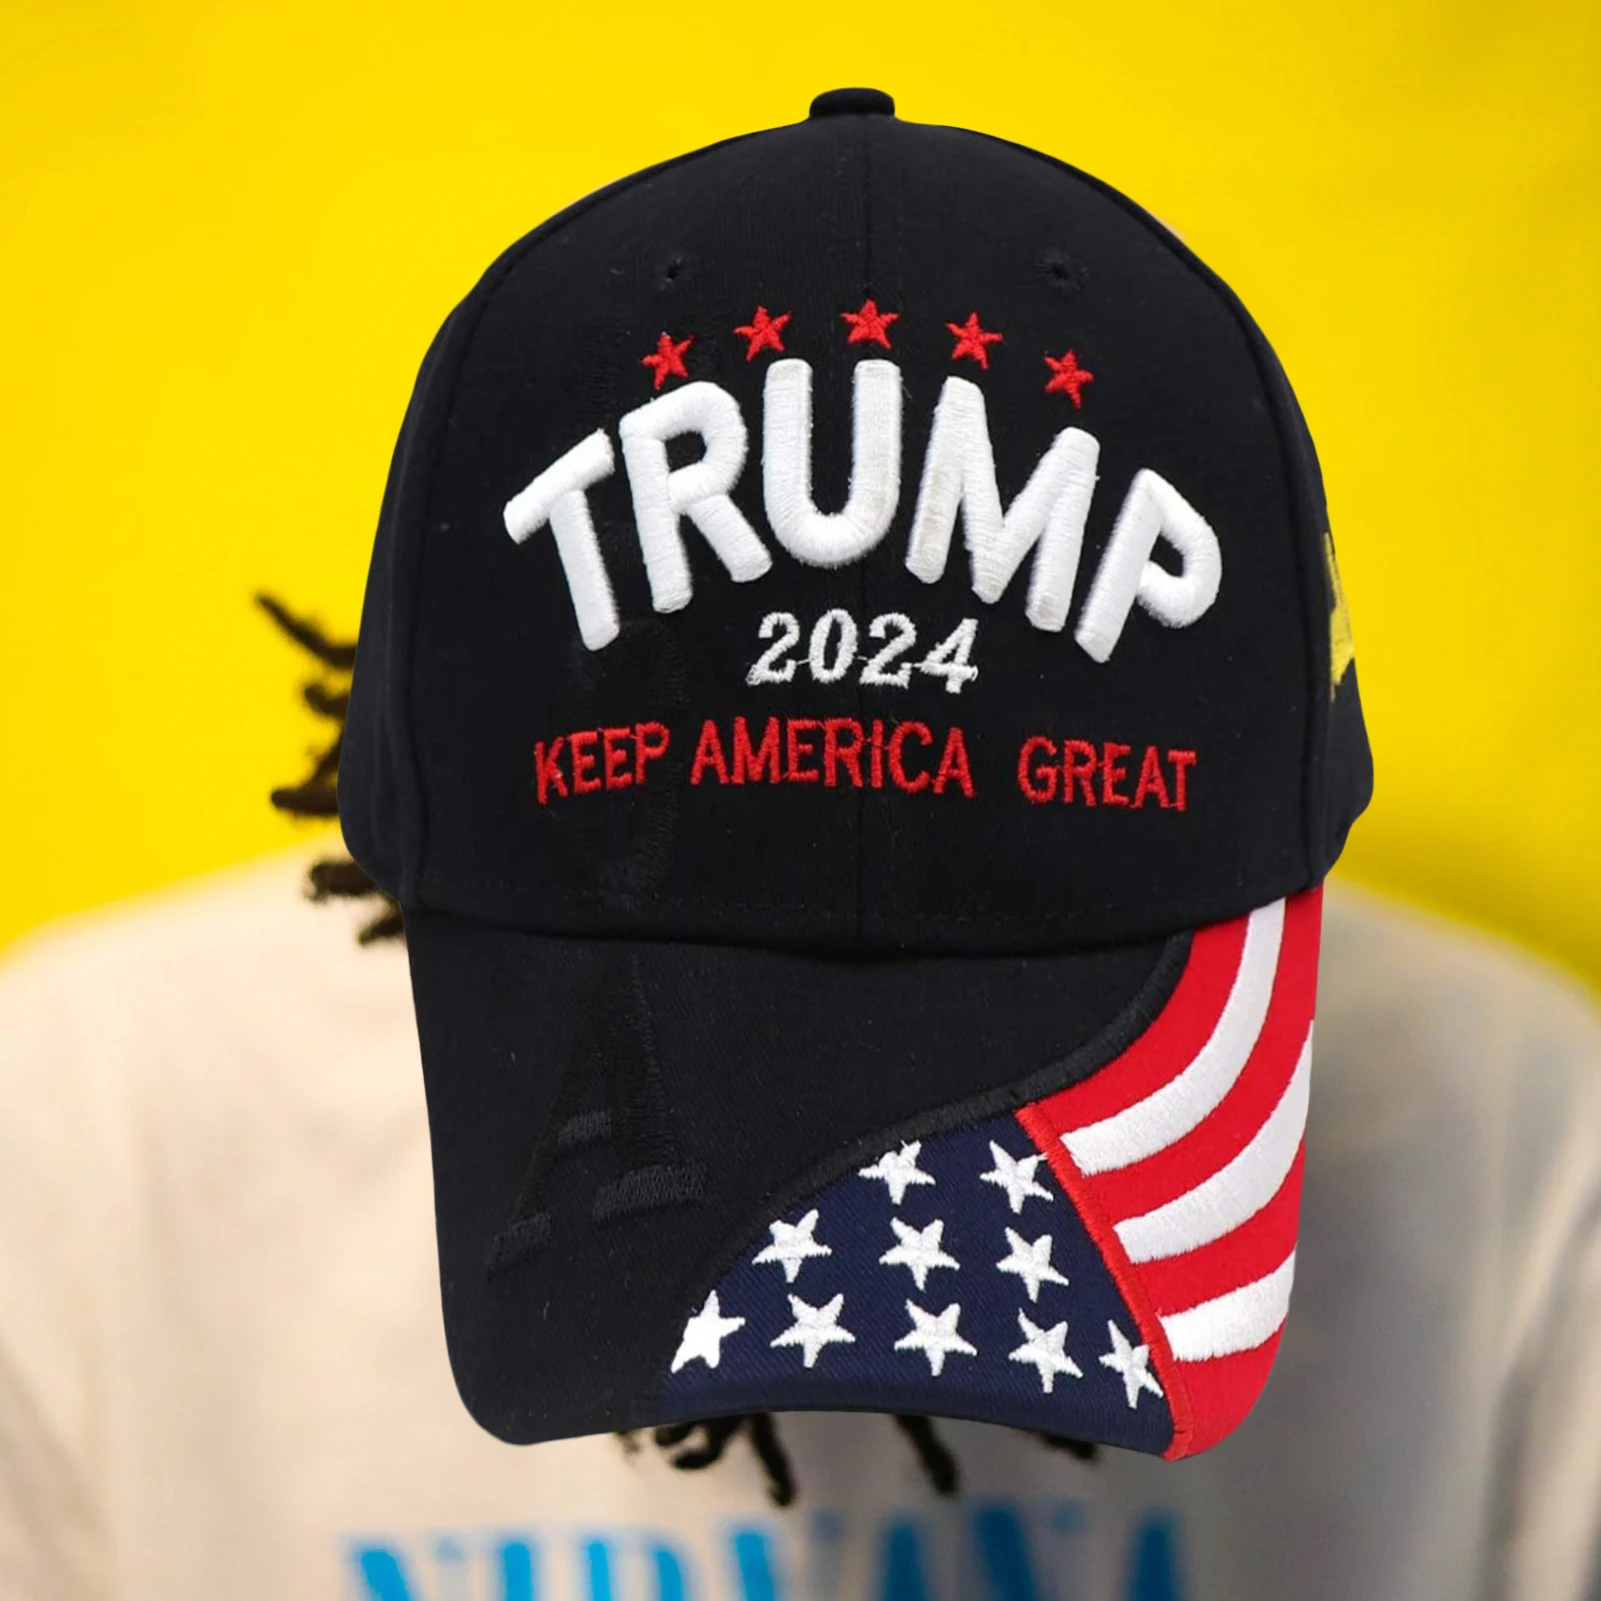 

Donald Trump 2024 Cap Camouflage USA Flag Baseball Caps Keep America Great Again President Hat 3D Embroidery Hot Sell!